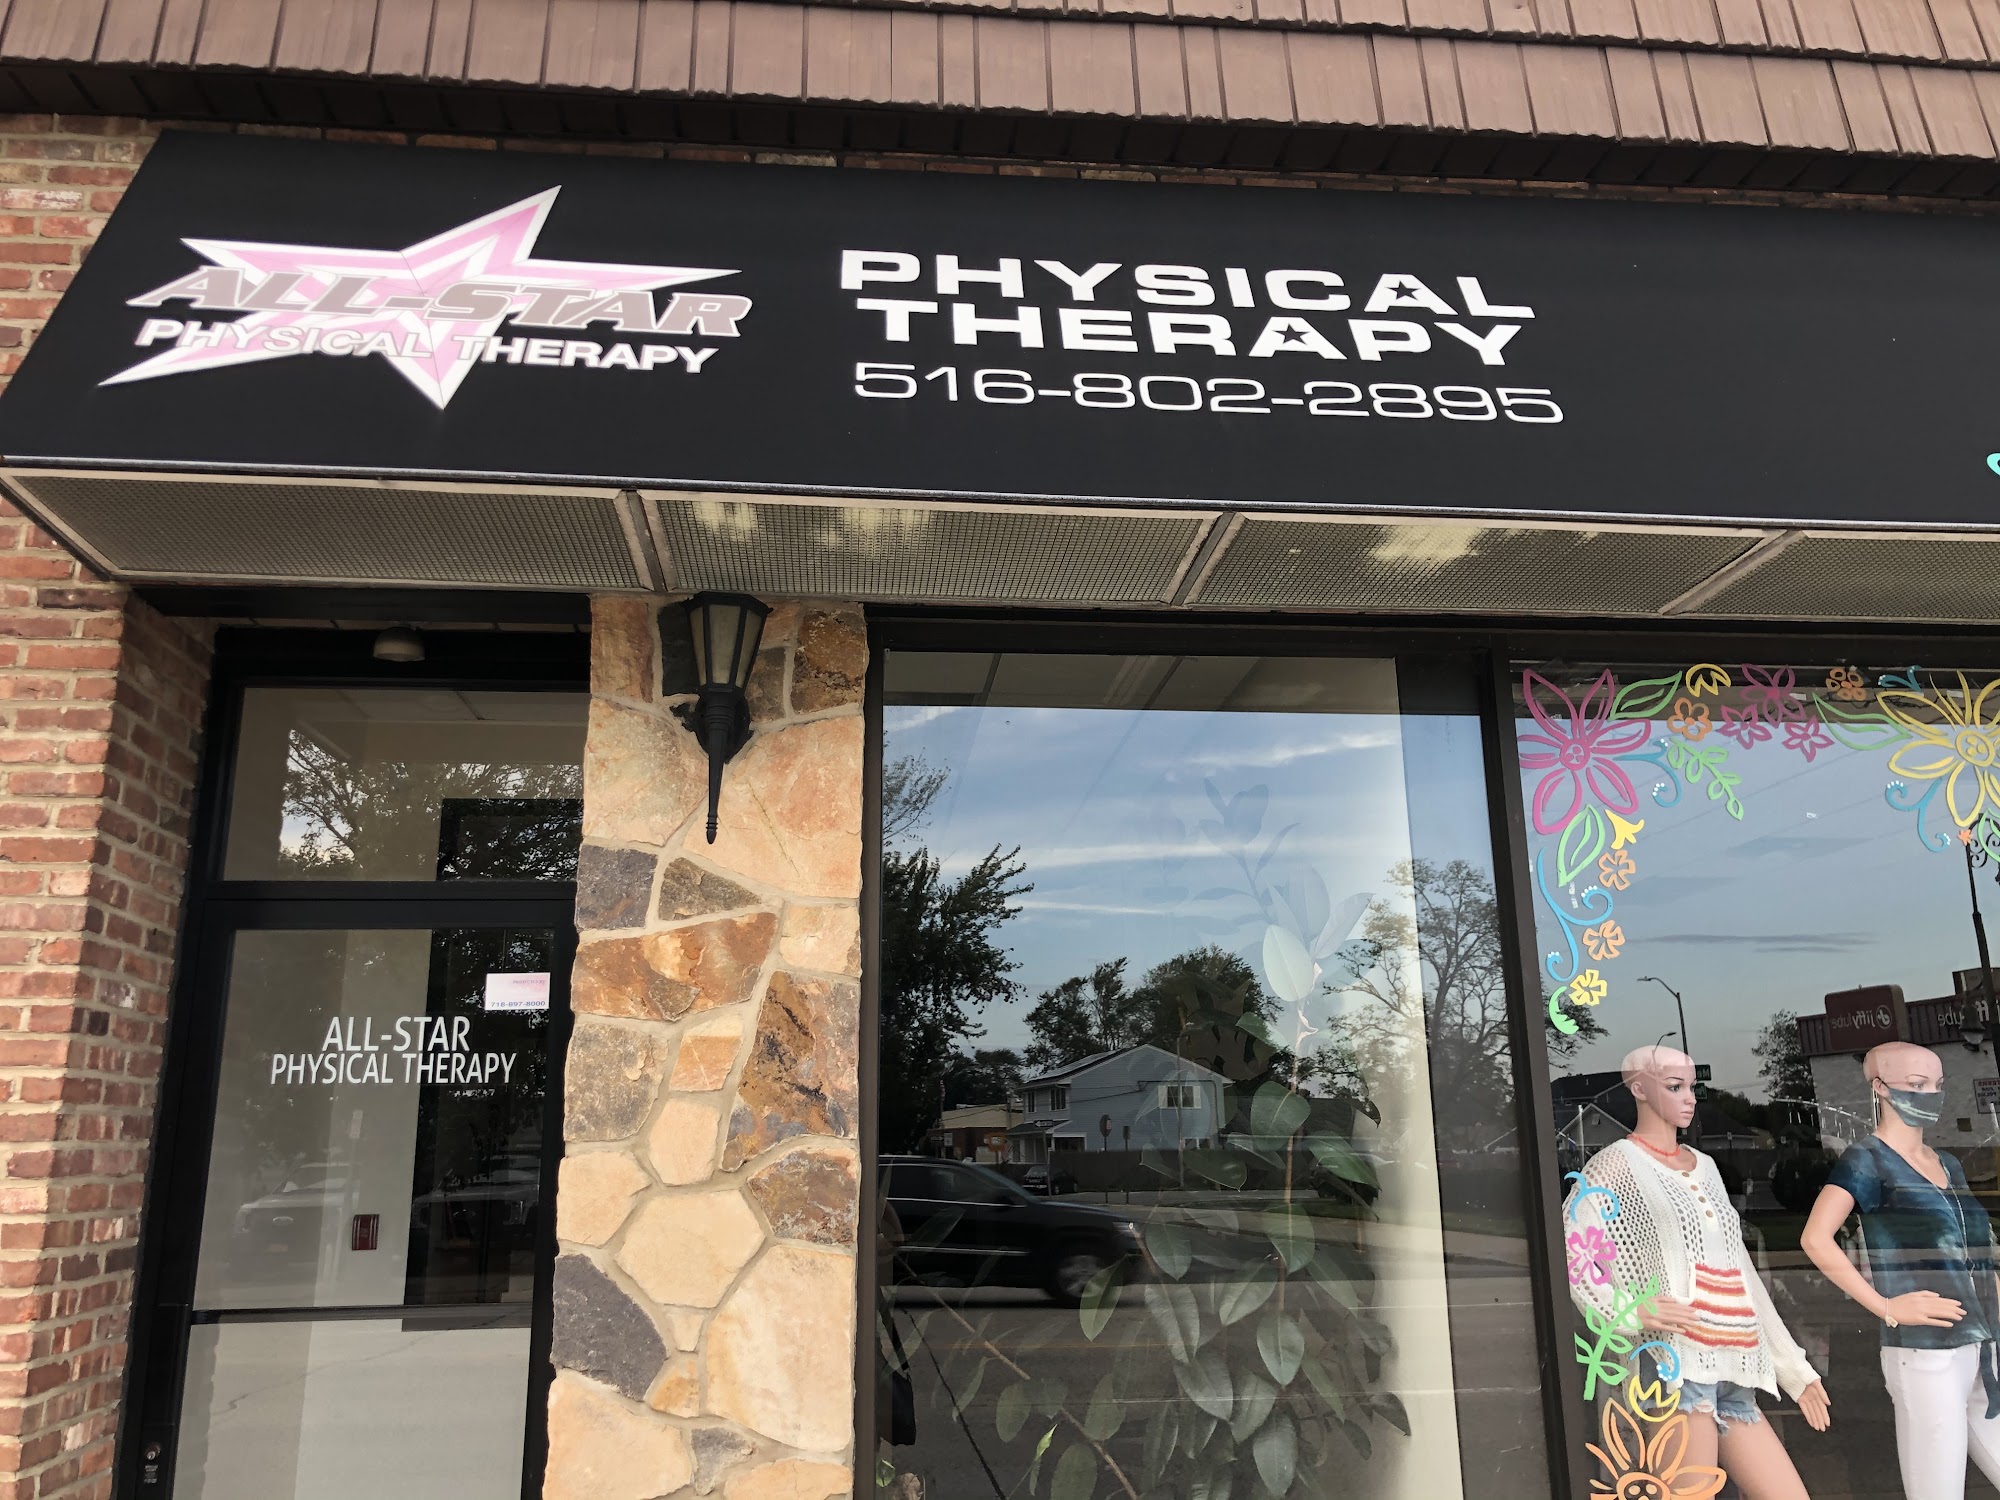 All Star Physical Therapy - Seaford 3839 Merrick Rd, Seaford New York 11783